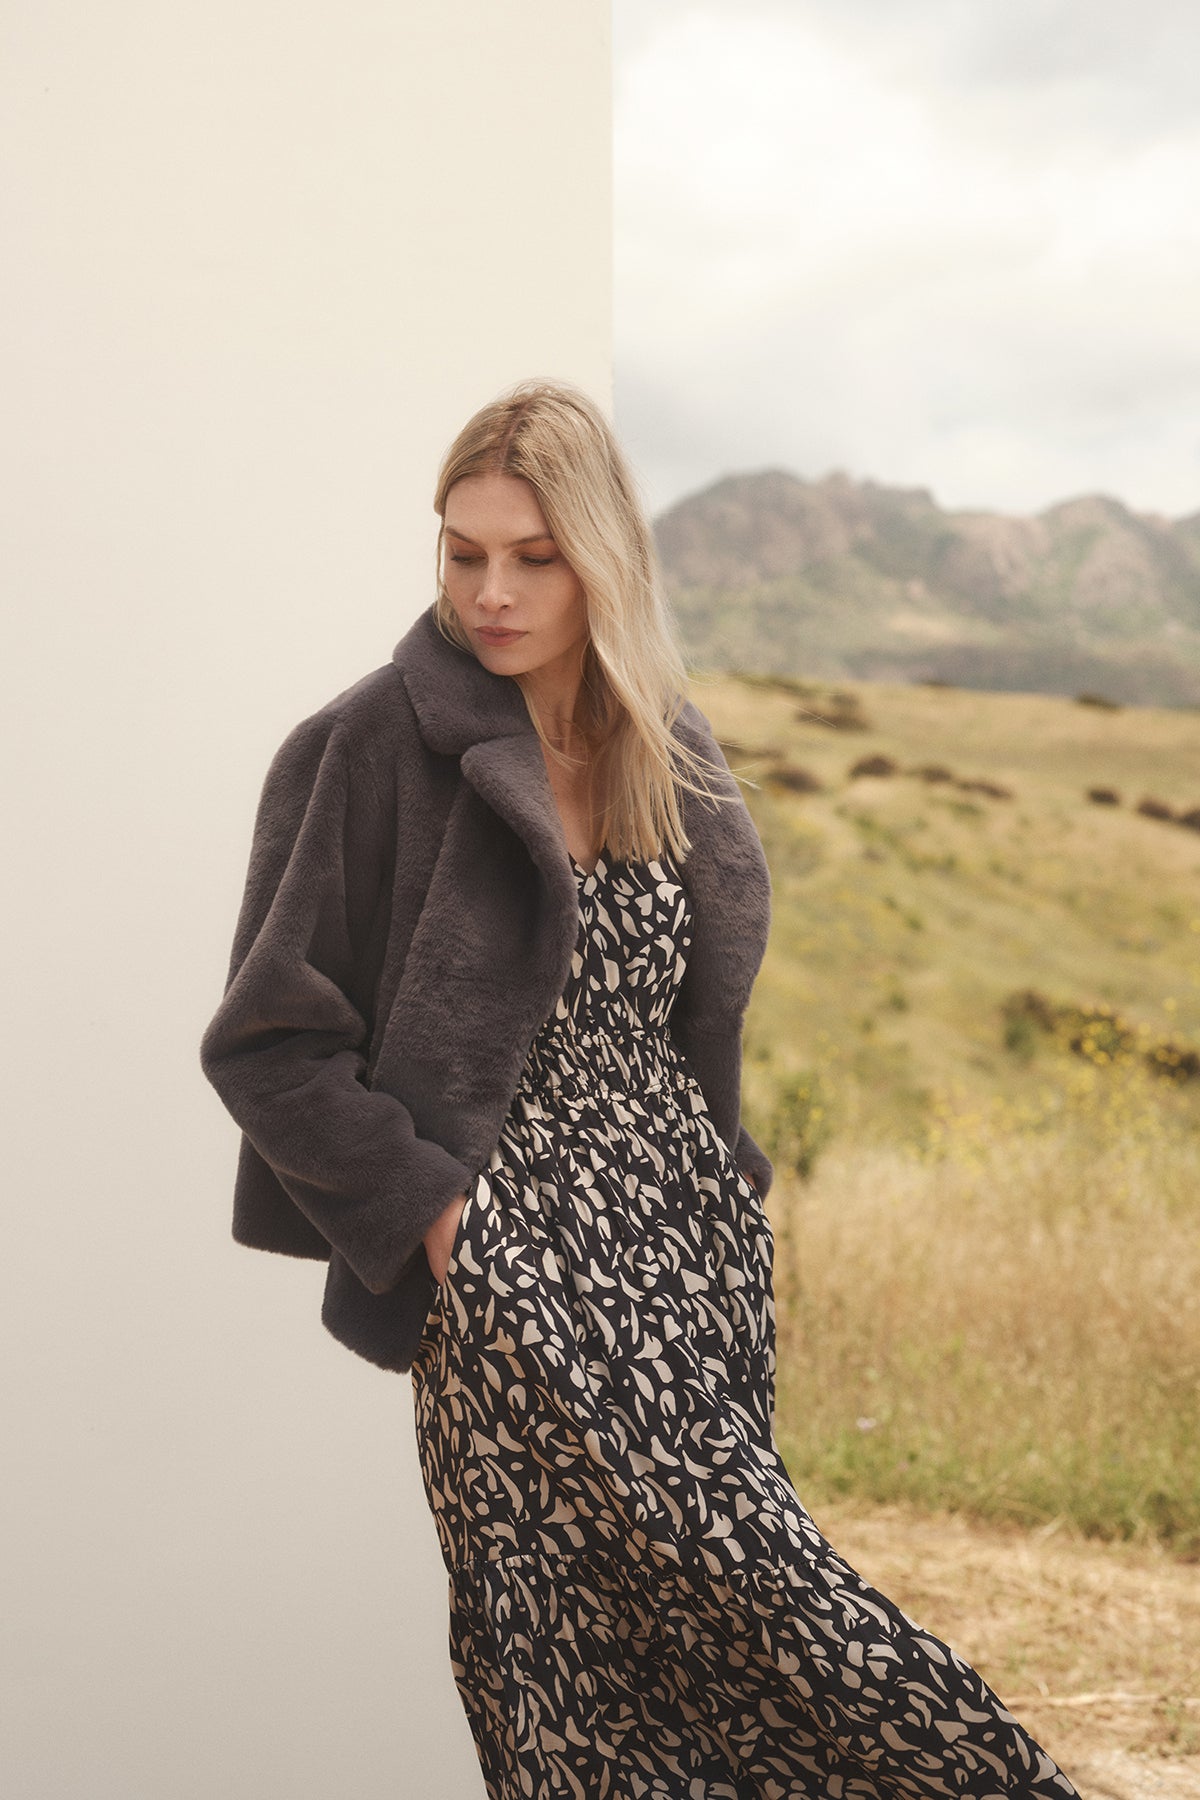 A woman in a LYUDA PRINTED SATIN MIDI DRESS by Velvet by Graham & Spencer with a v-neckline and a grey faux fur jacket.-35571933511873